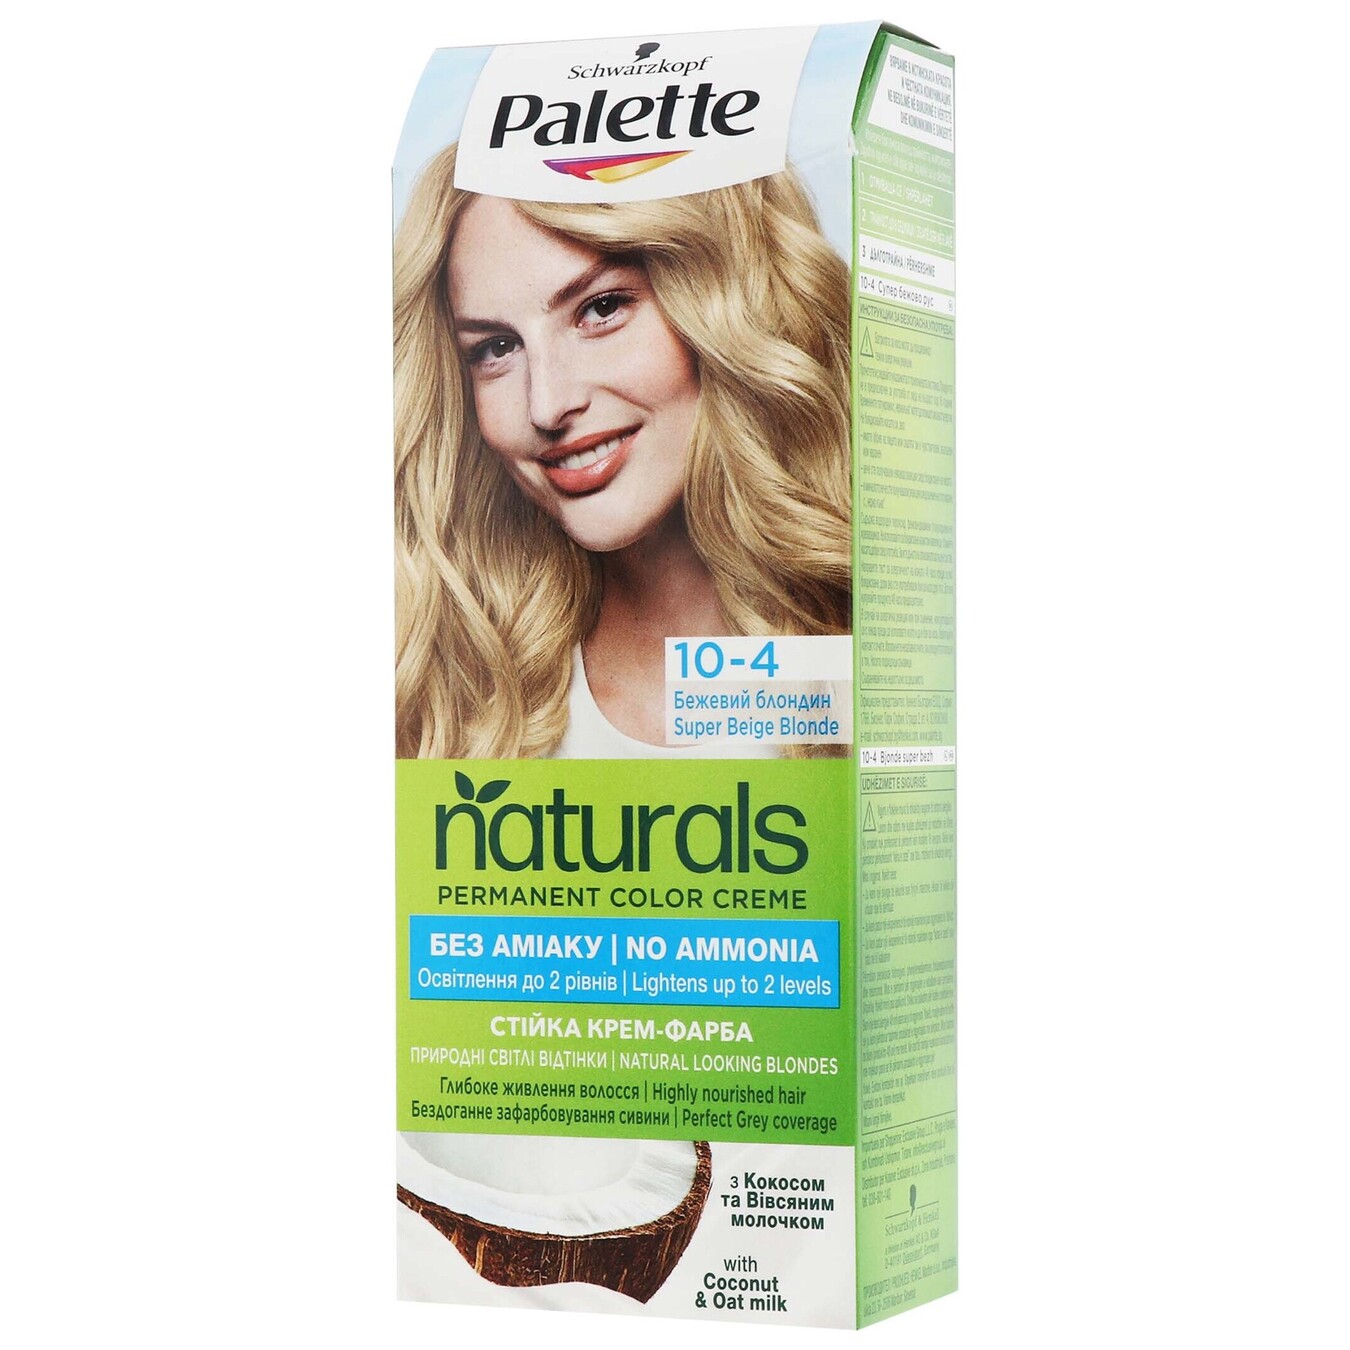 Cream-dye Palette Naturals 10-4 Beige blond without ammonia permanent hair color 110ml 2